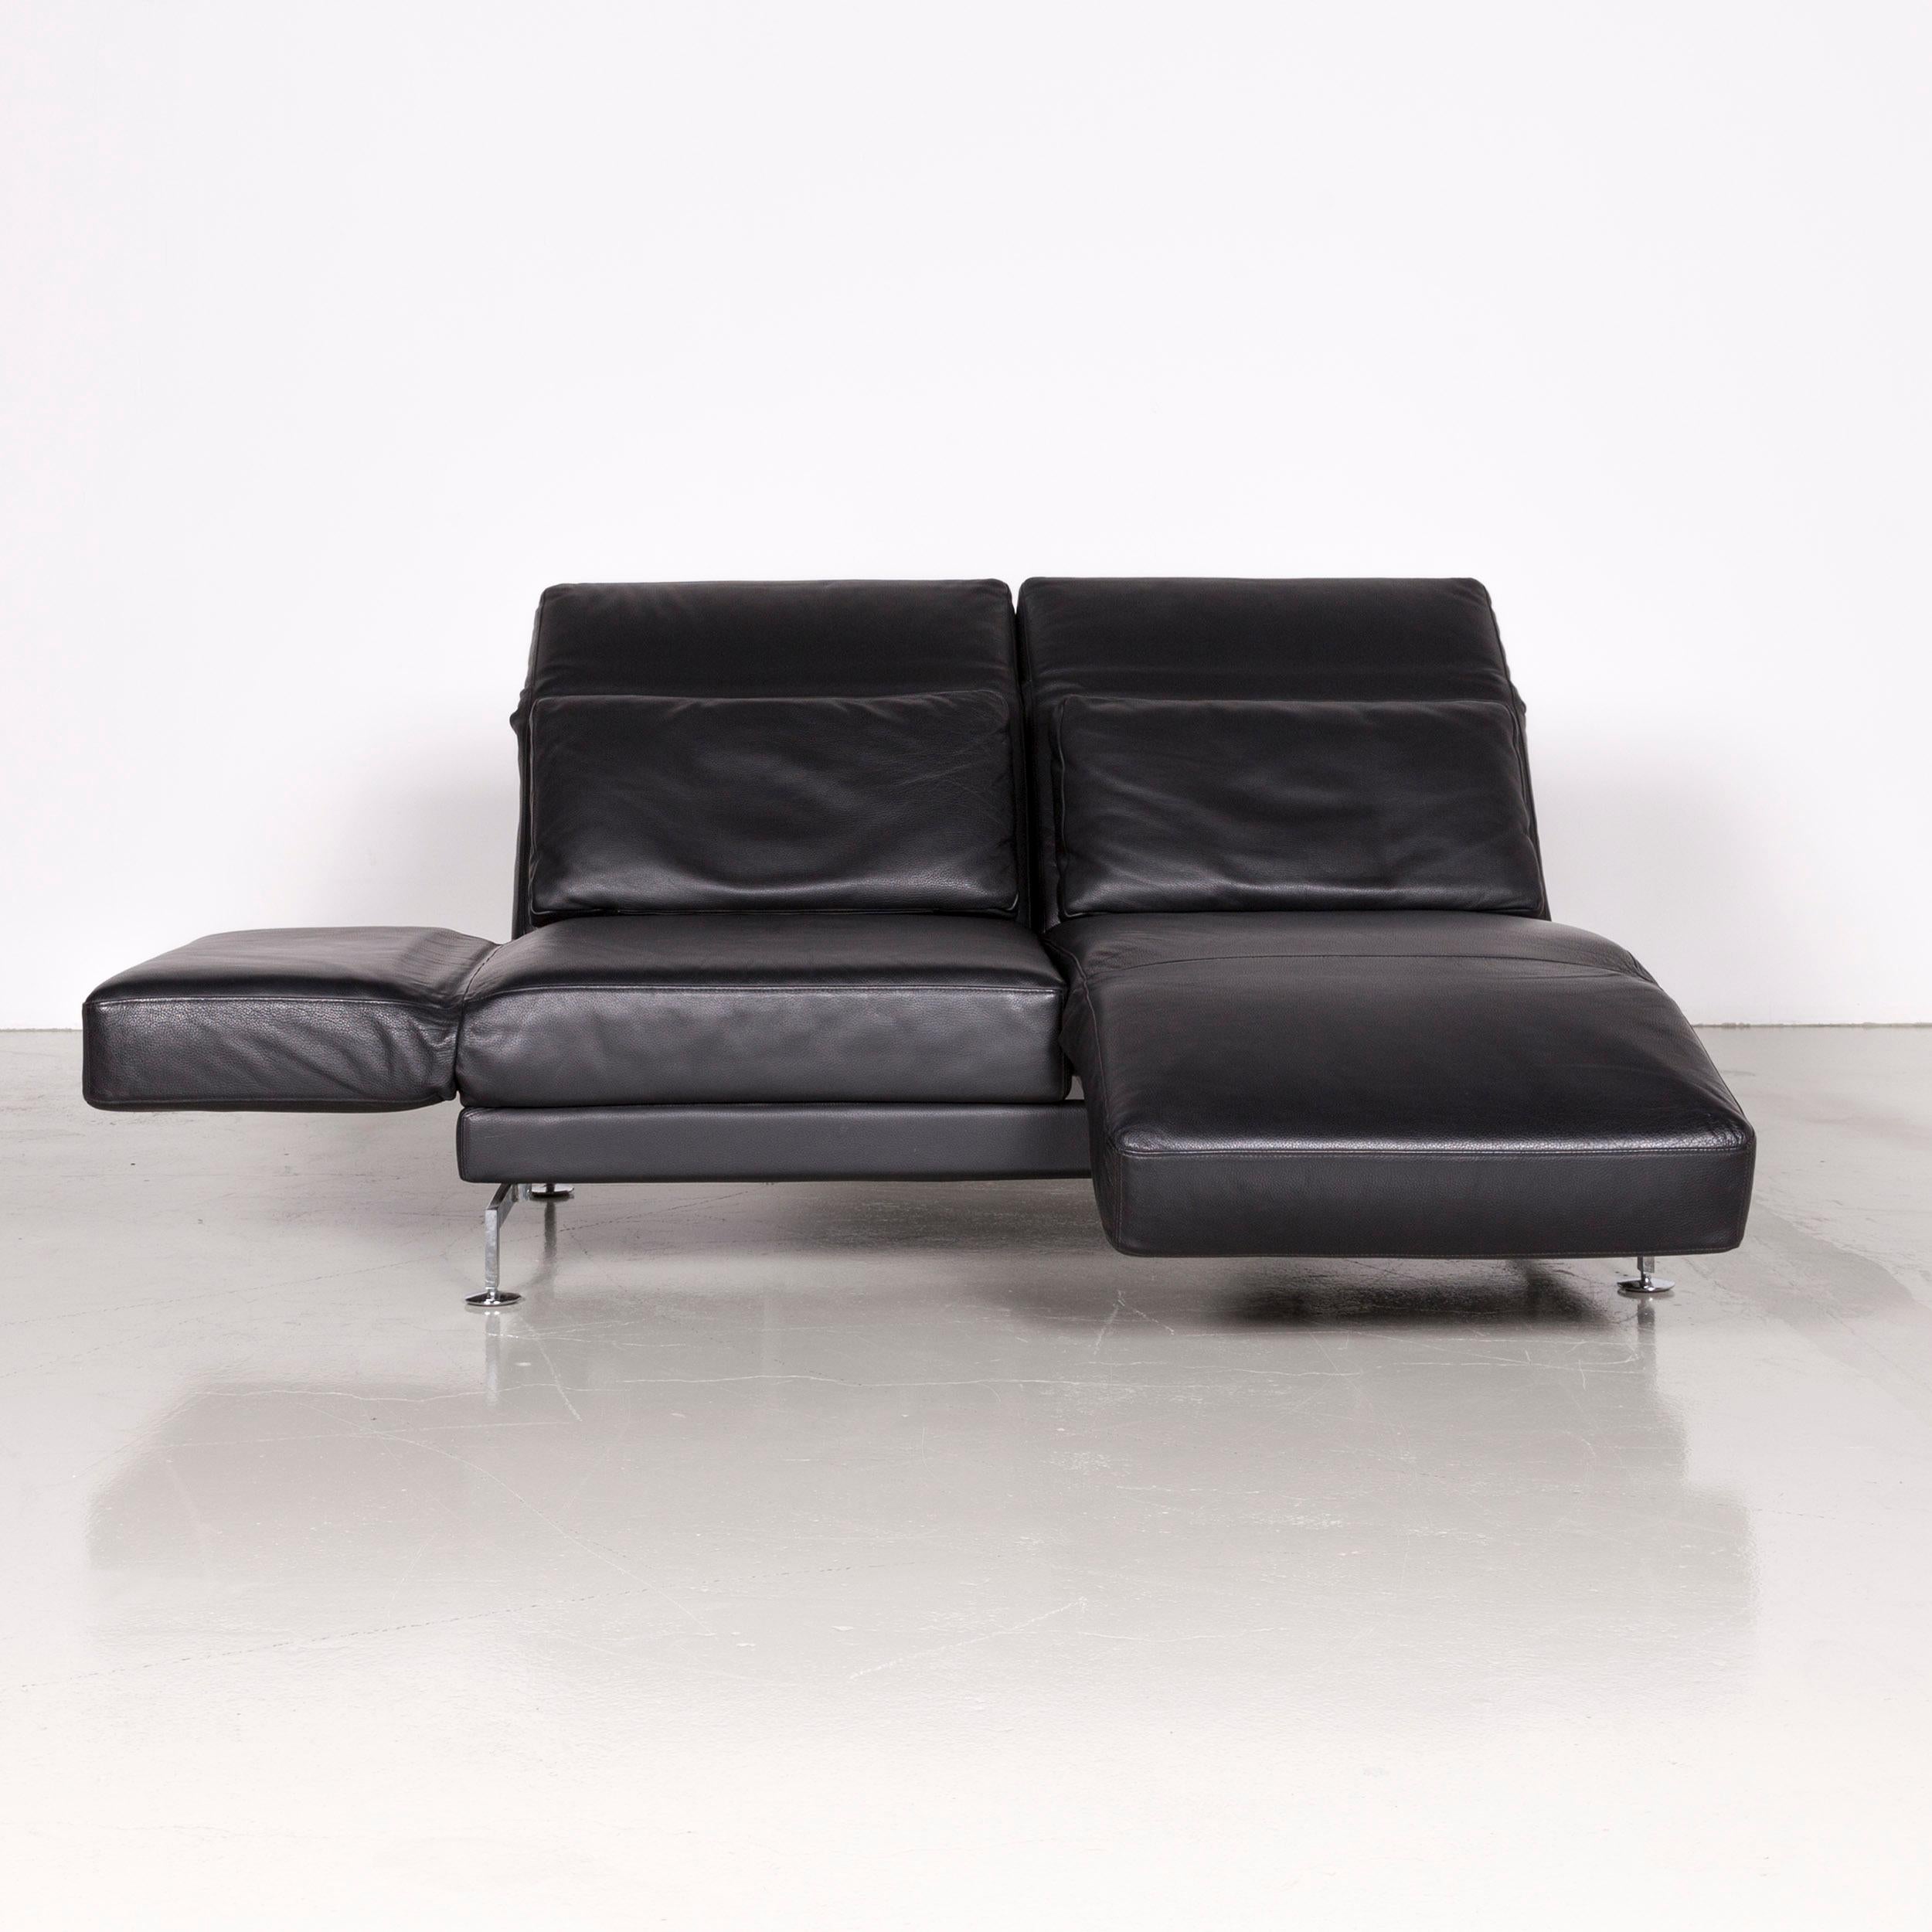 Contemporary Brühl & Sippold Moule Designer Leather Sofa Black Two-Seat Couch with Function